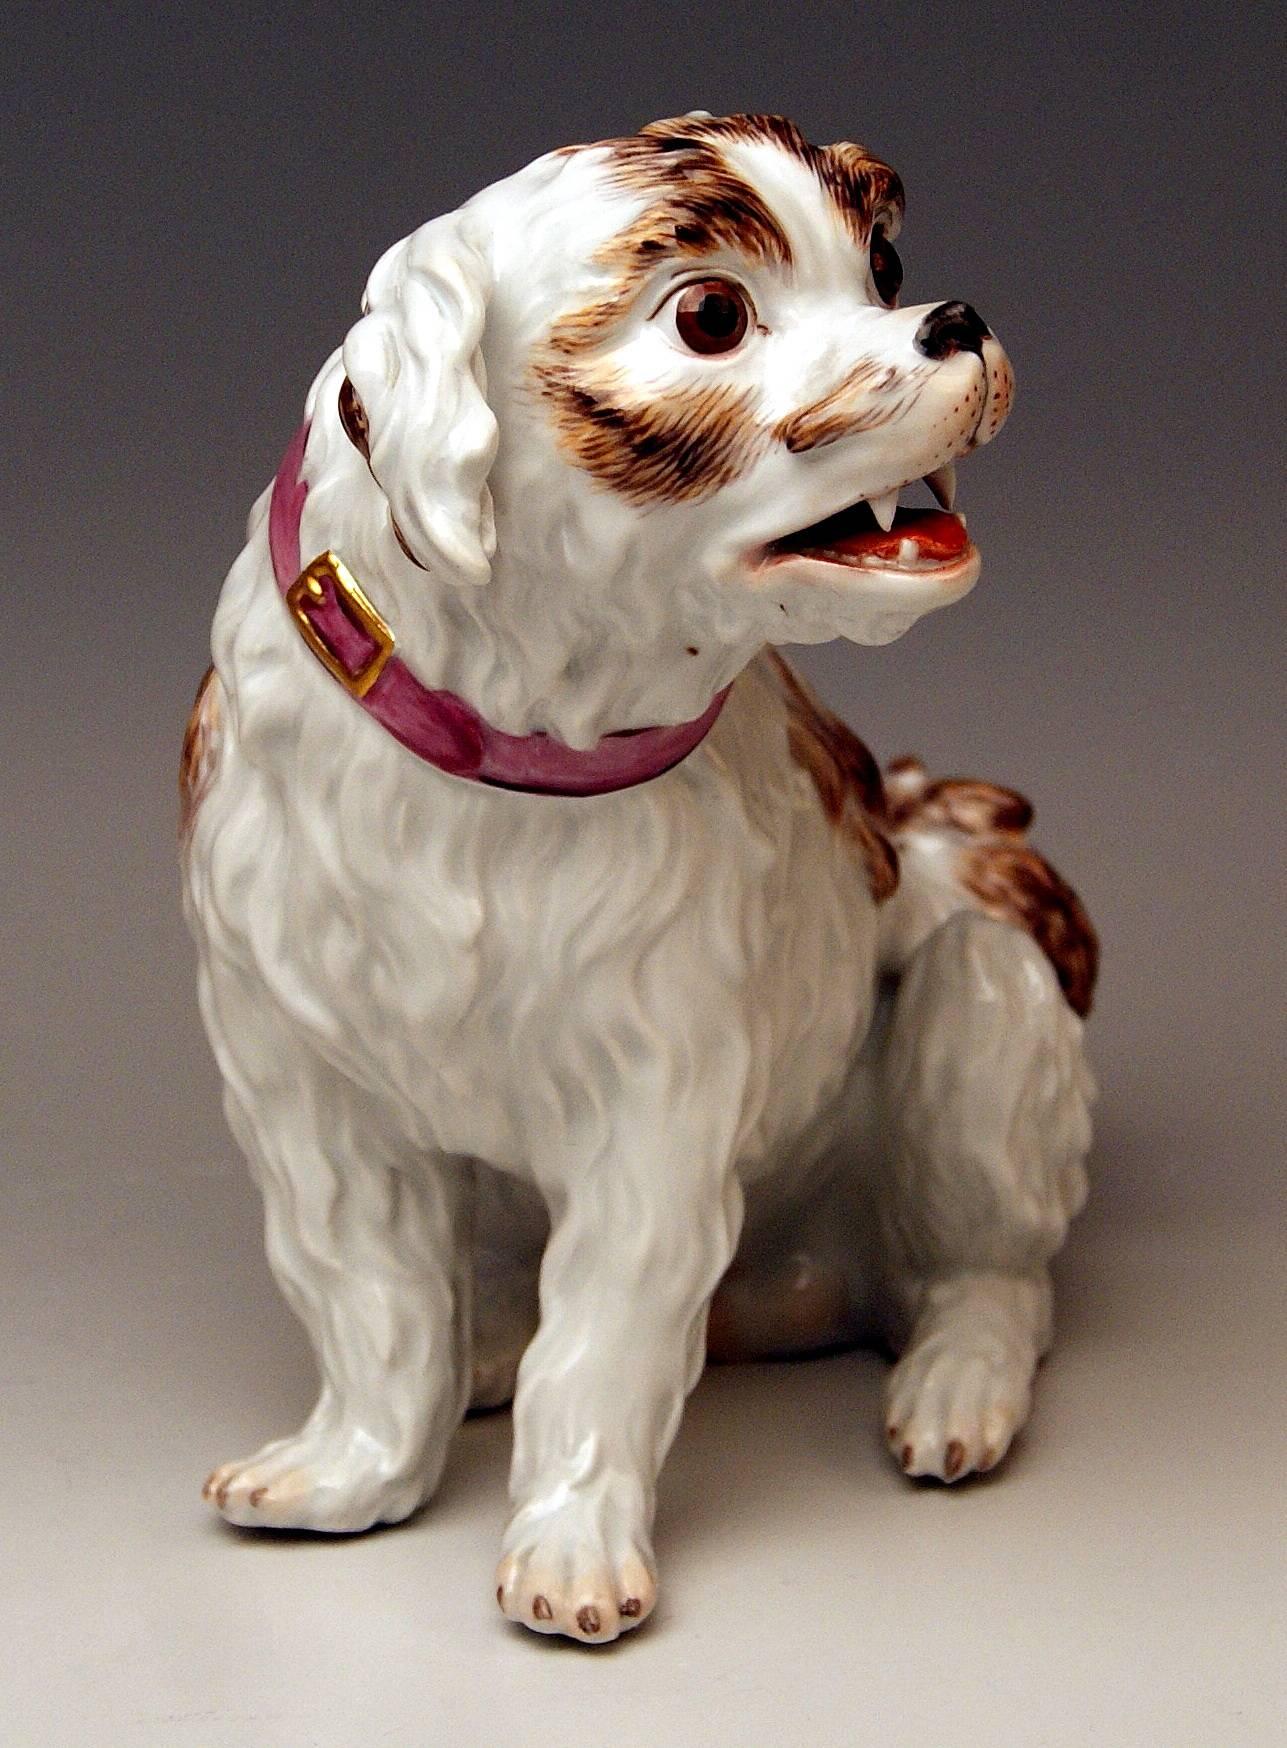 Meissen very lovely as well as gorgeous dog's figurine: So-said Spaniel dog, excellently manufactured.

Measures / dimensions:
height 7.48 inches / 19.0 cm 
width 9.055 inches / 23.0 cm 
depth 4.33 inches / 11.0 cm 

Manufactory: